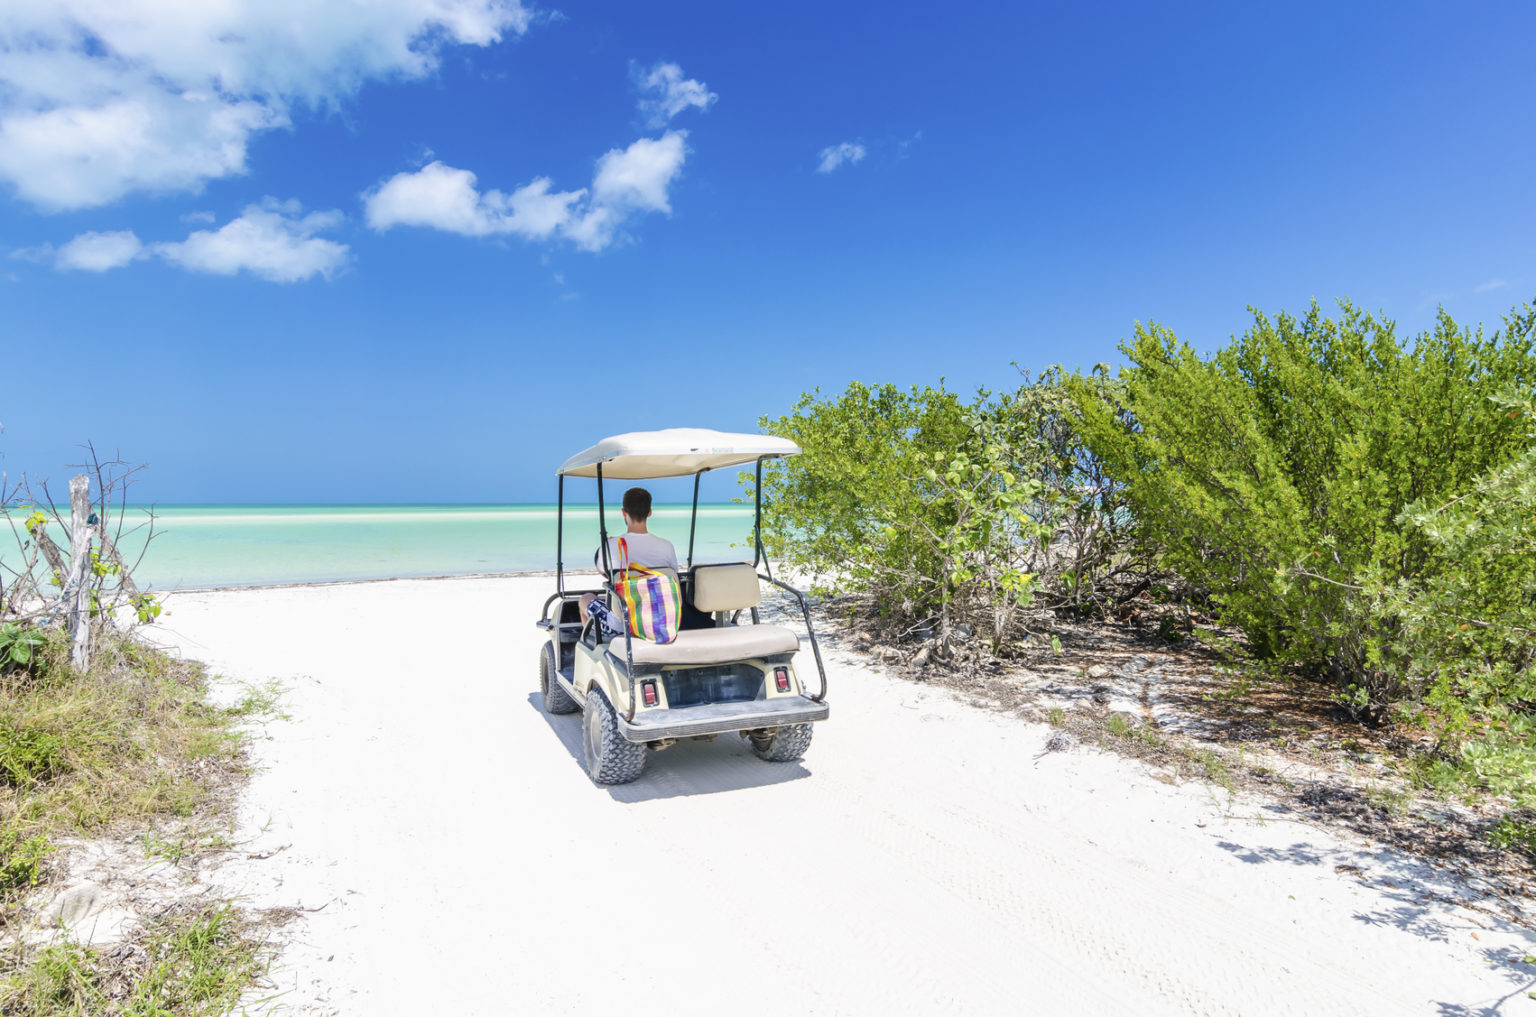 Cute young man driving golf cart back view at tropical white sandy beach during his Caribbean vacation on Holbox island, Mexico